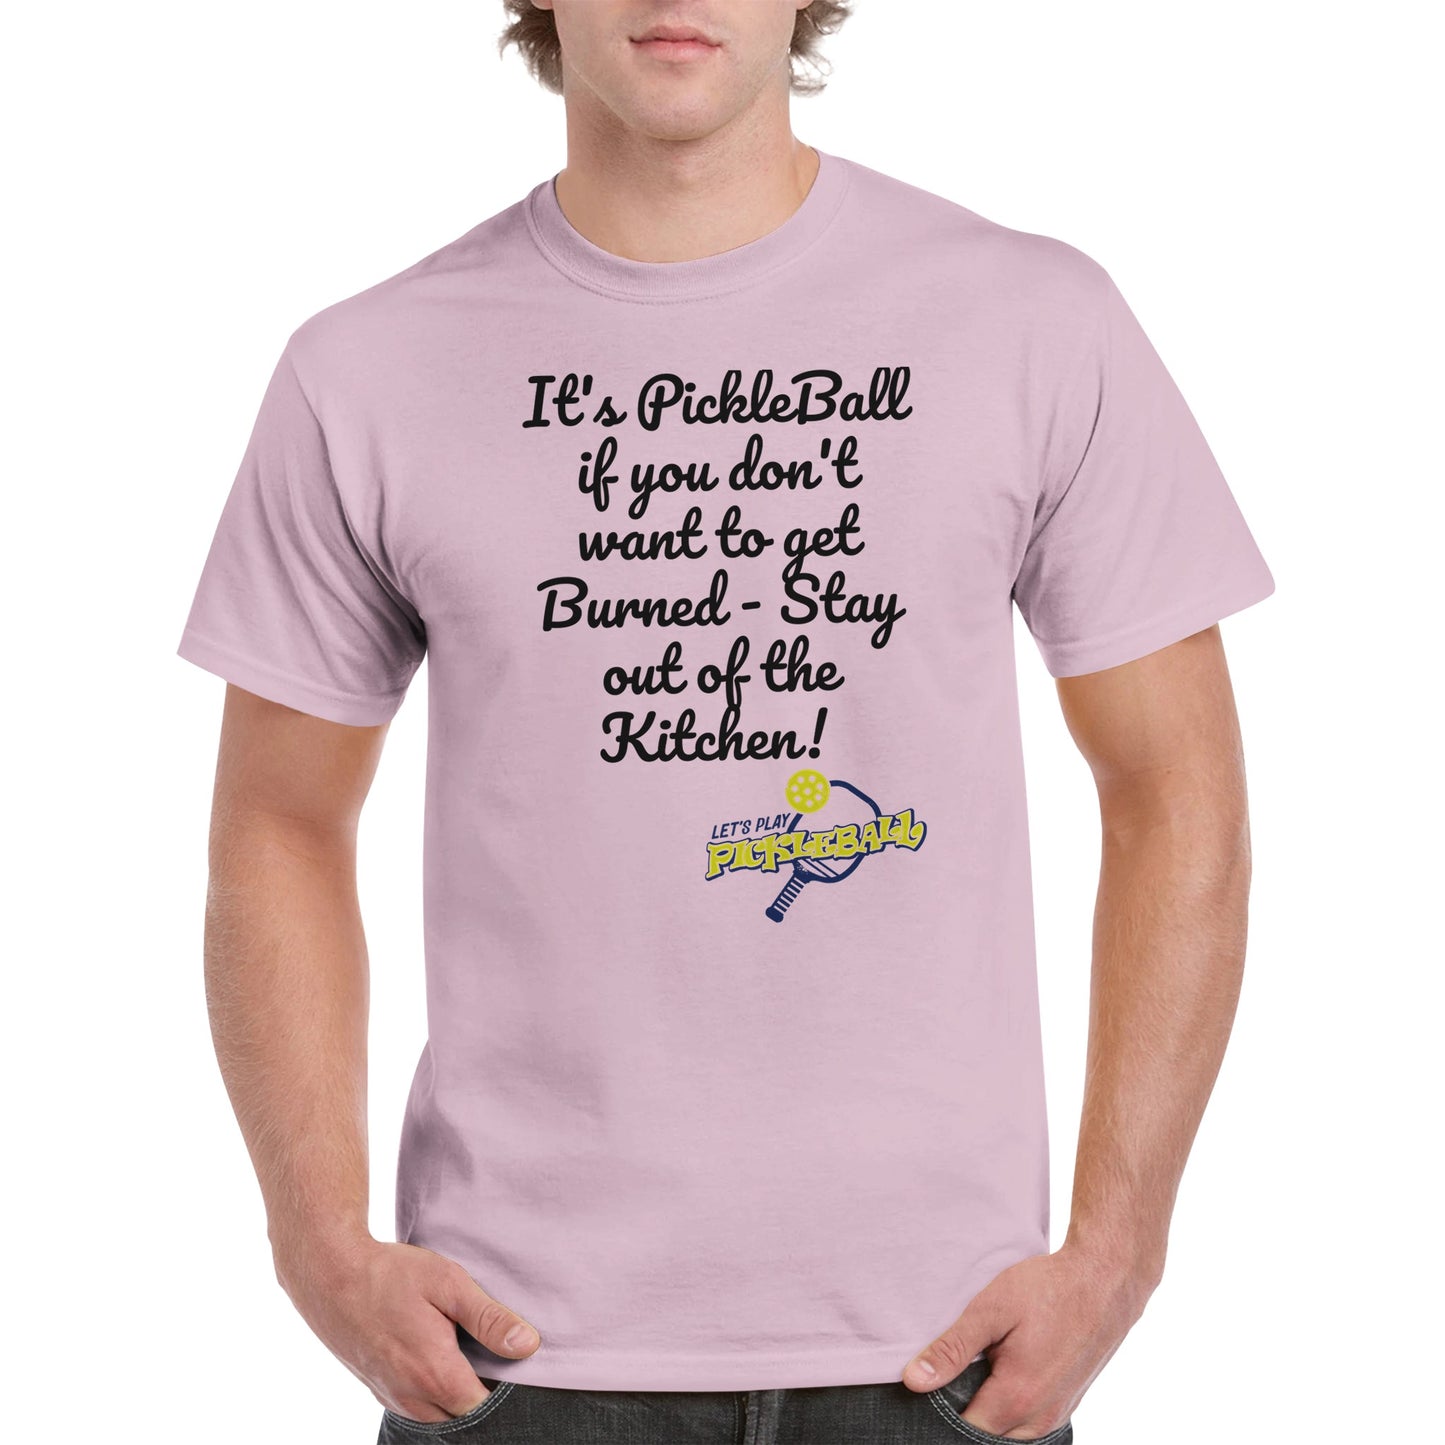 Light Pink comfortable Unisex Crewneck heavyweight cotton t-shirt with funny saying It’s PickleBall if you don’t want to get Burned – Stay out of the Kitchen! and Let’s Play Pickleball logo on the front from WhatYa Say Apparel worn by blonde-haired male front view.